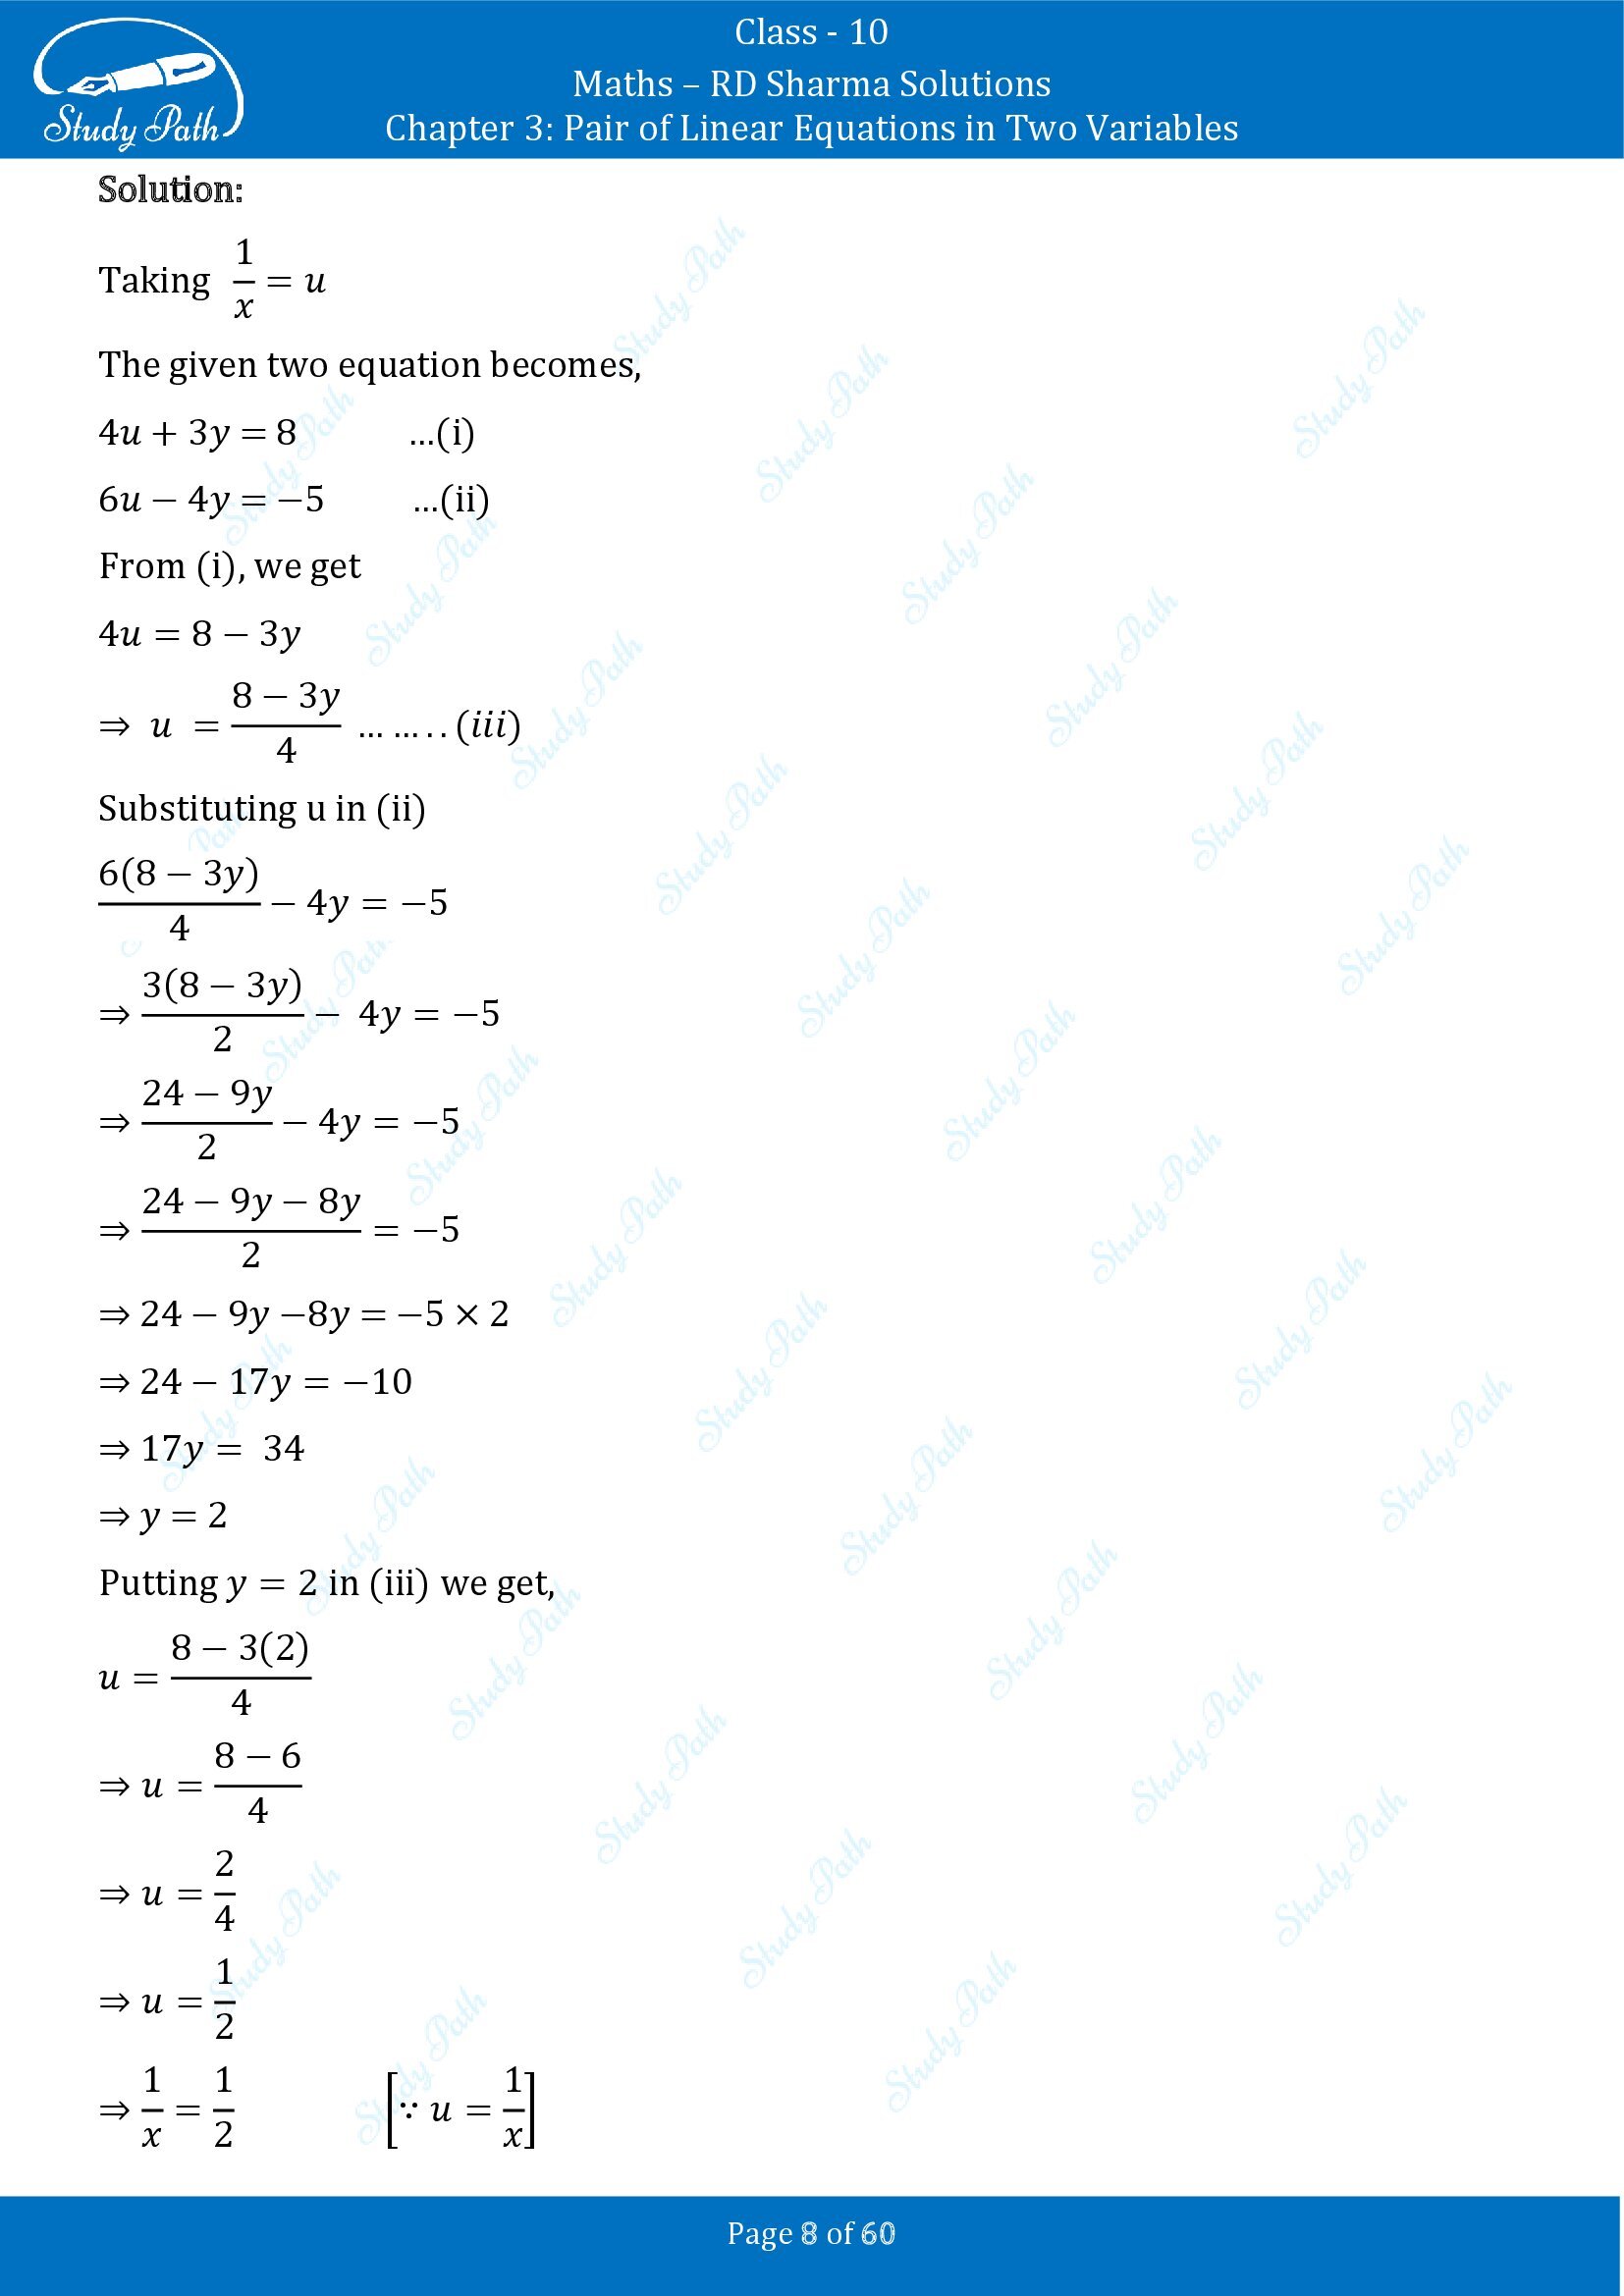 RD Sharma Solutions Class 10 Chapter 3 Pair of Linear Equations in Two Variables Exercise 3.3 00008